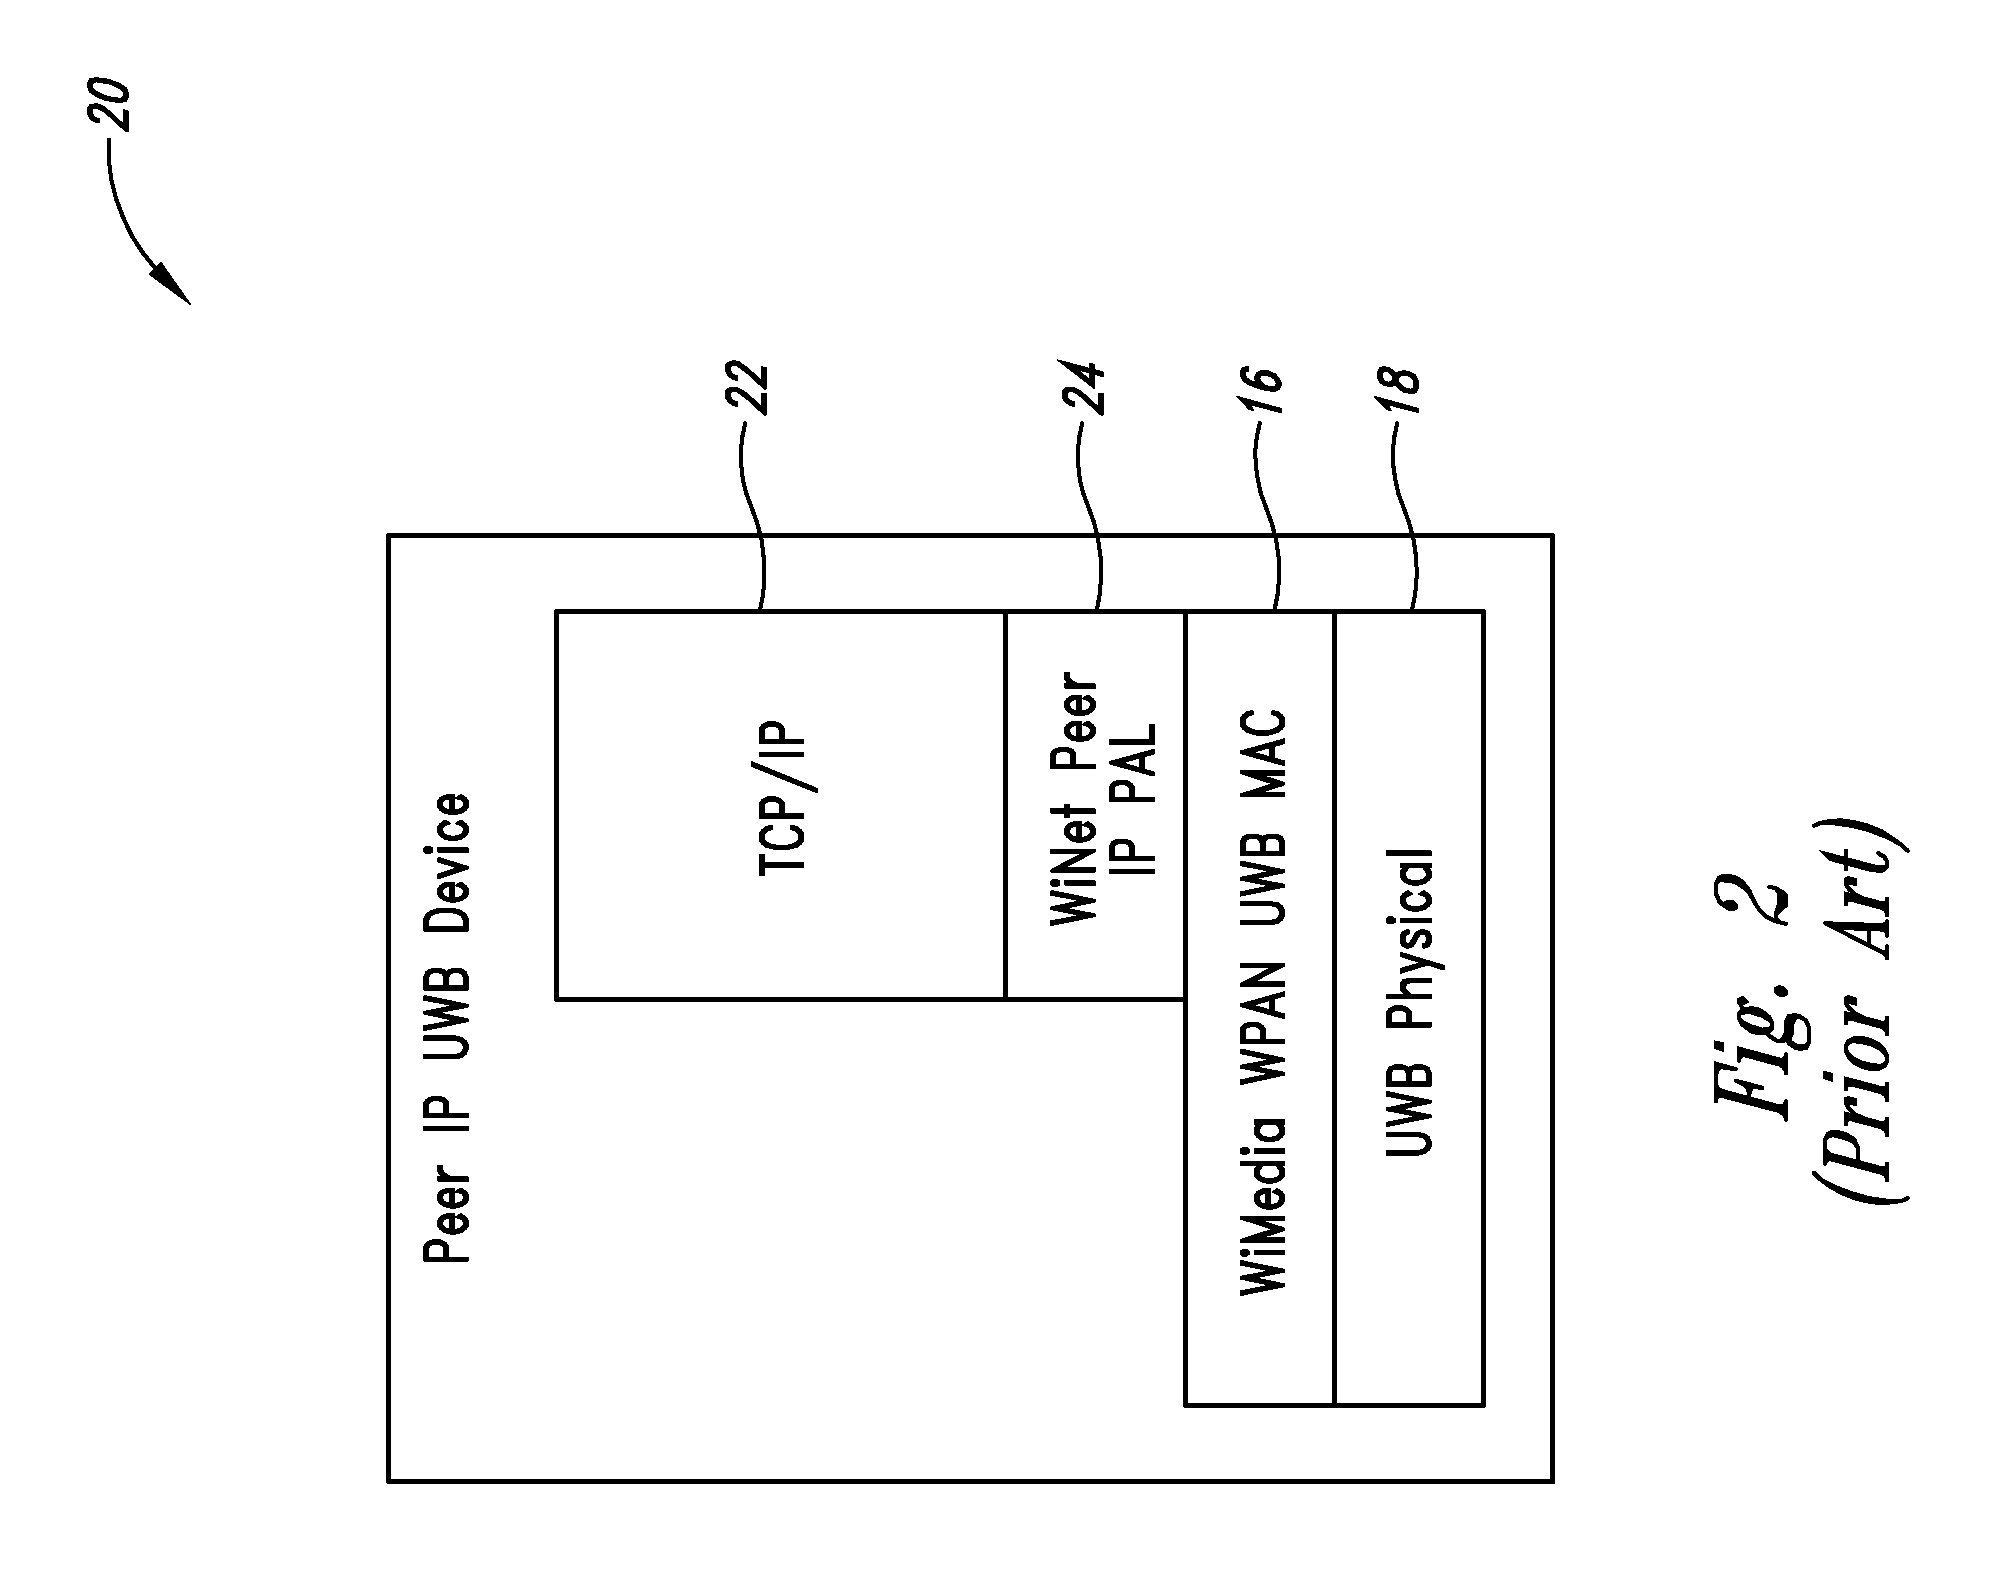 LAN by ultra-wideband system and method